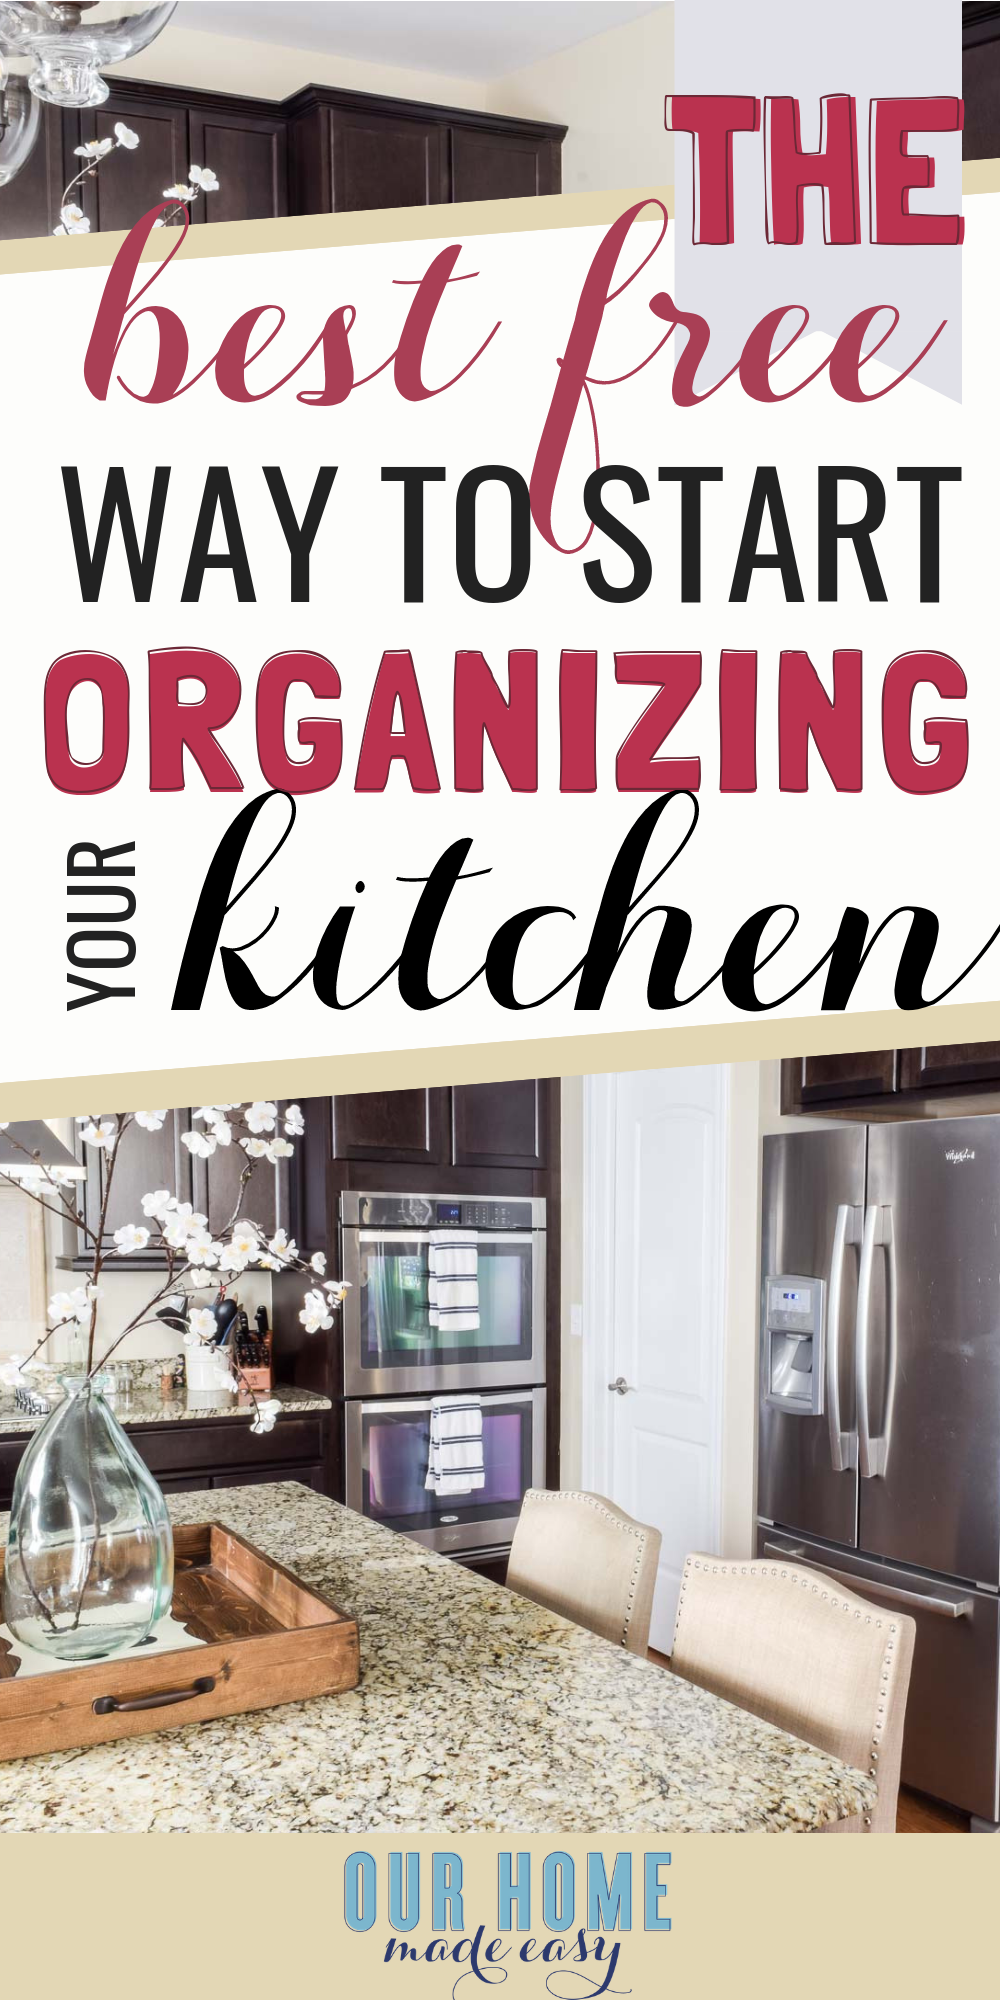 The best free way to start organizing your kitchen